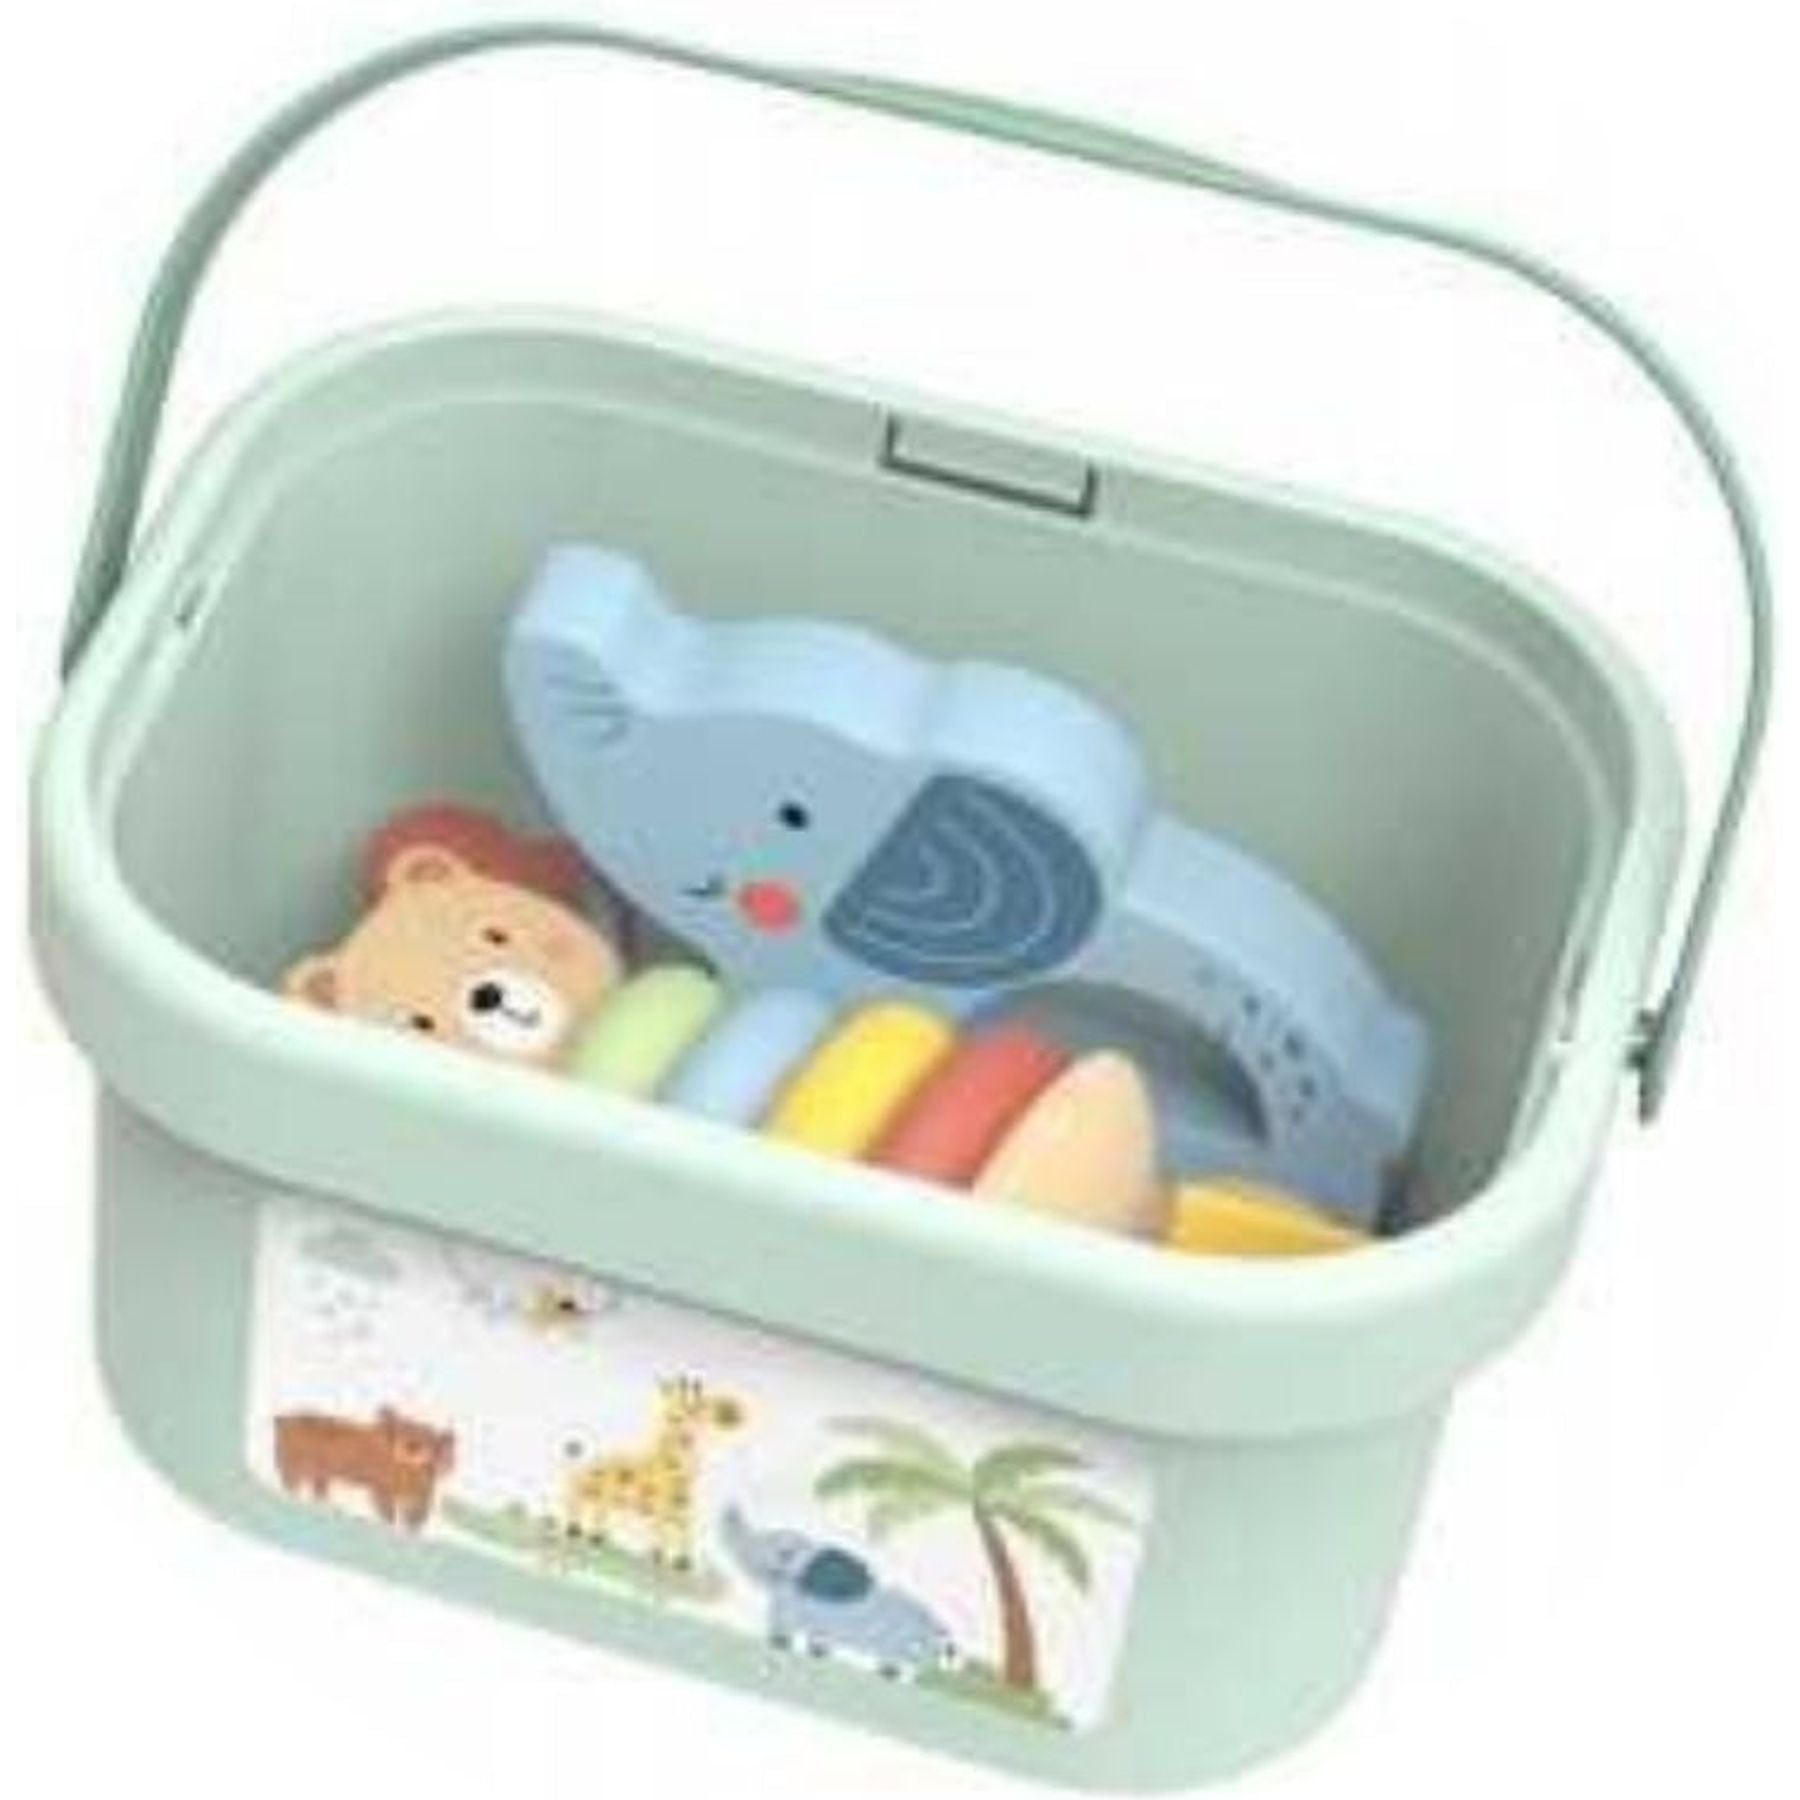 3 in 1 Toy Box - Toybox Tales